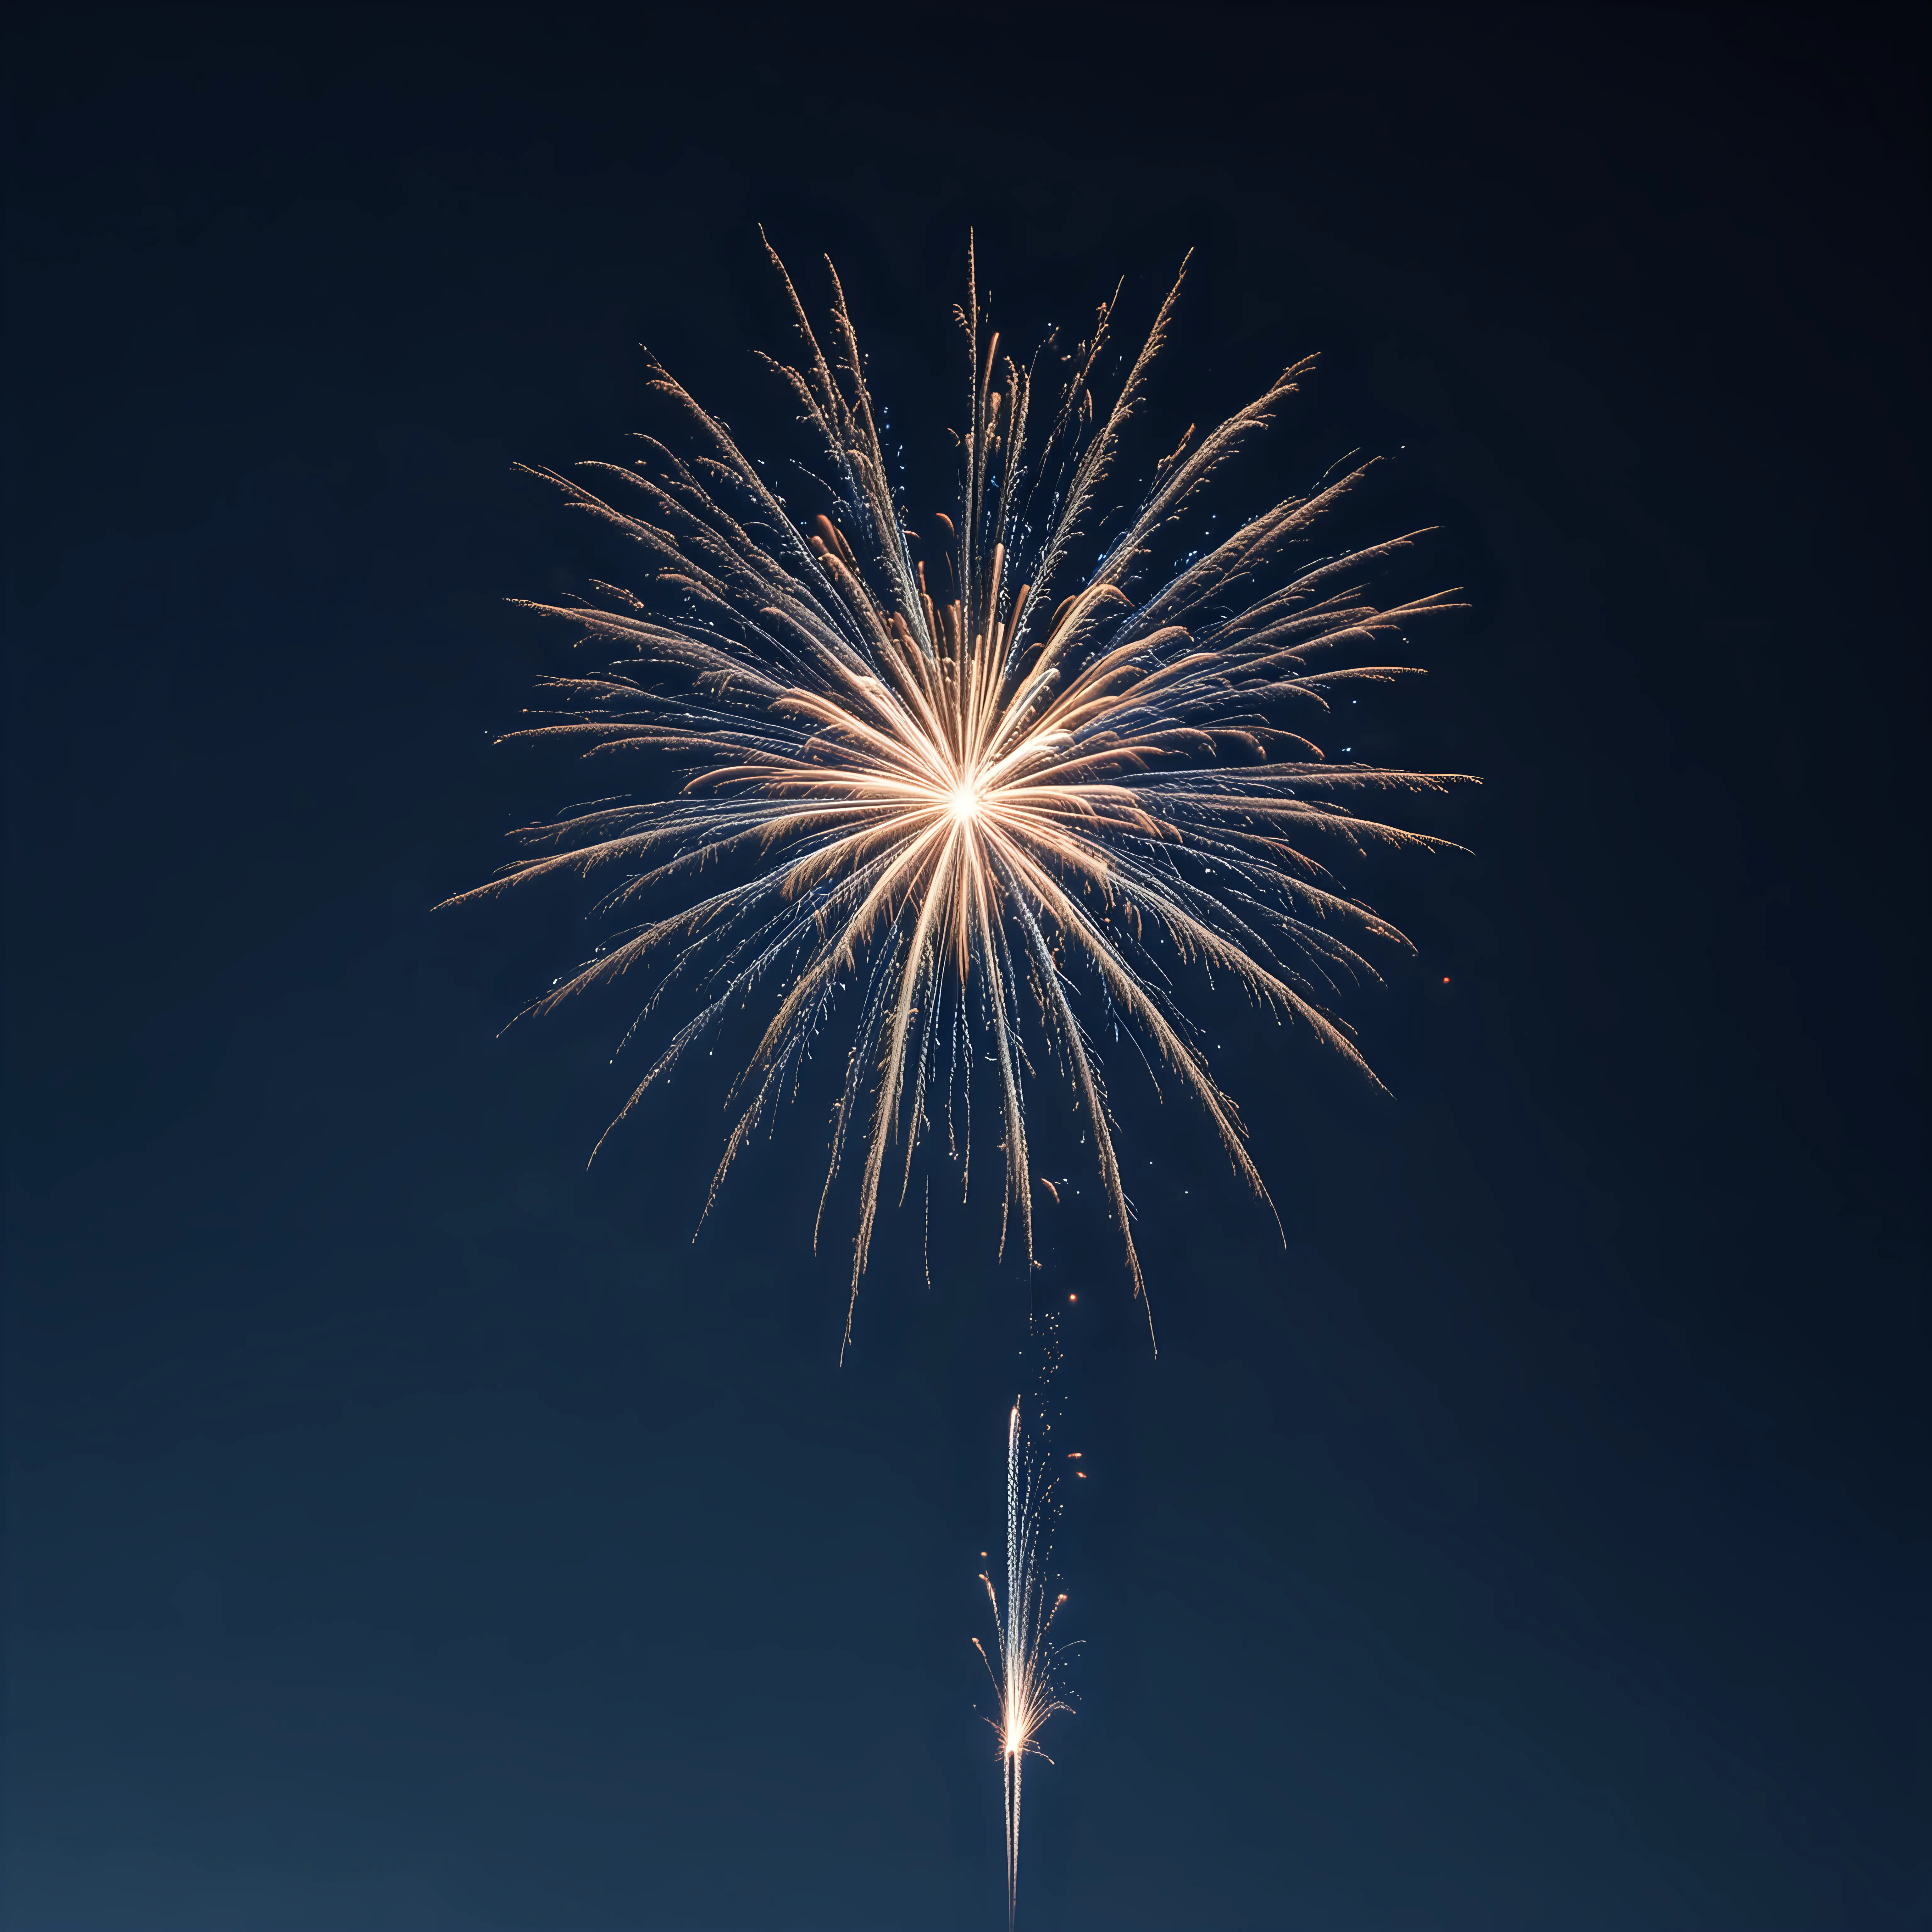 one small firework on a natural dark blue sky background with dimension to it and with no ground